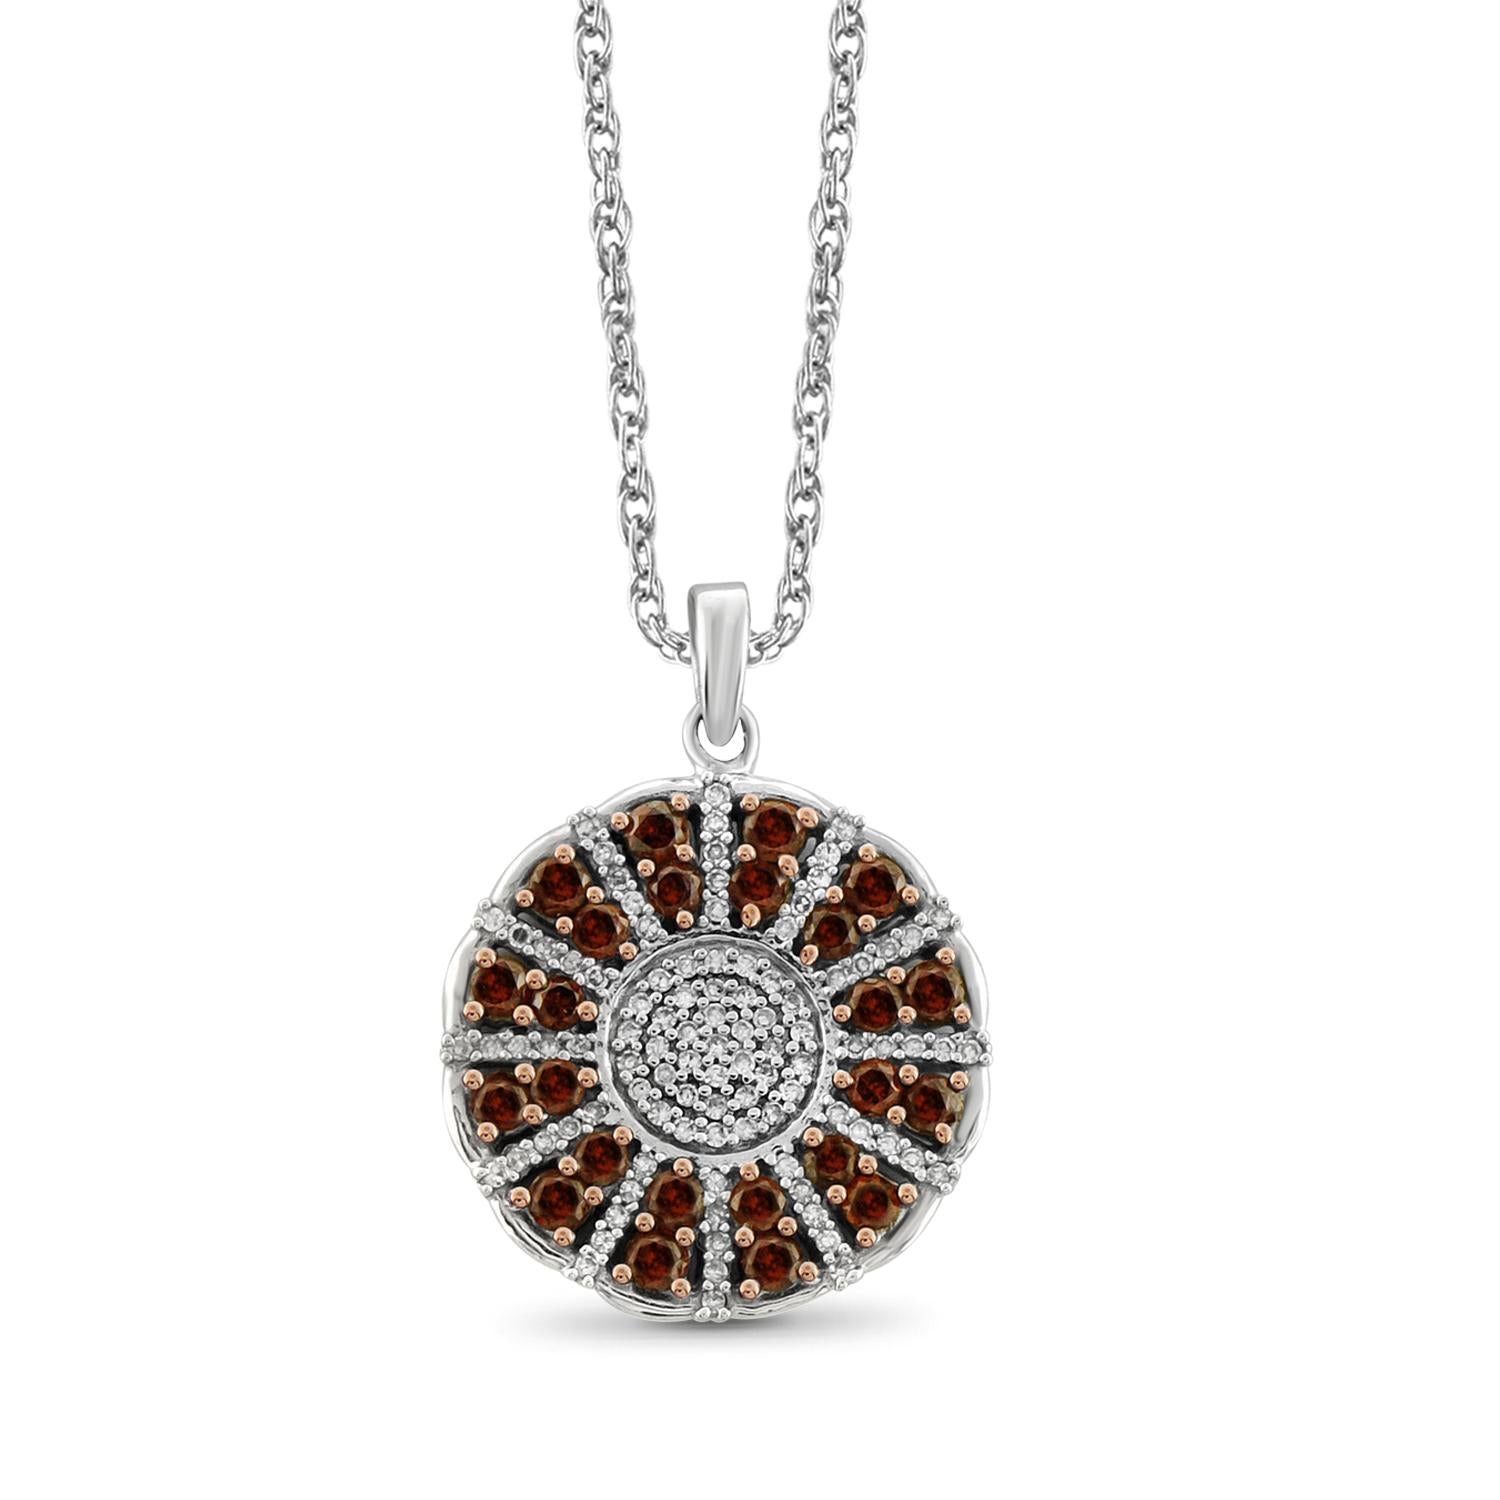 1.00 Carat Red & White Diamond Pendant in Sterling Silver